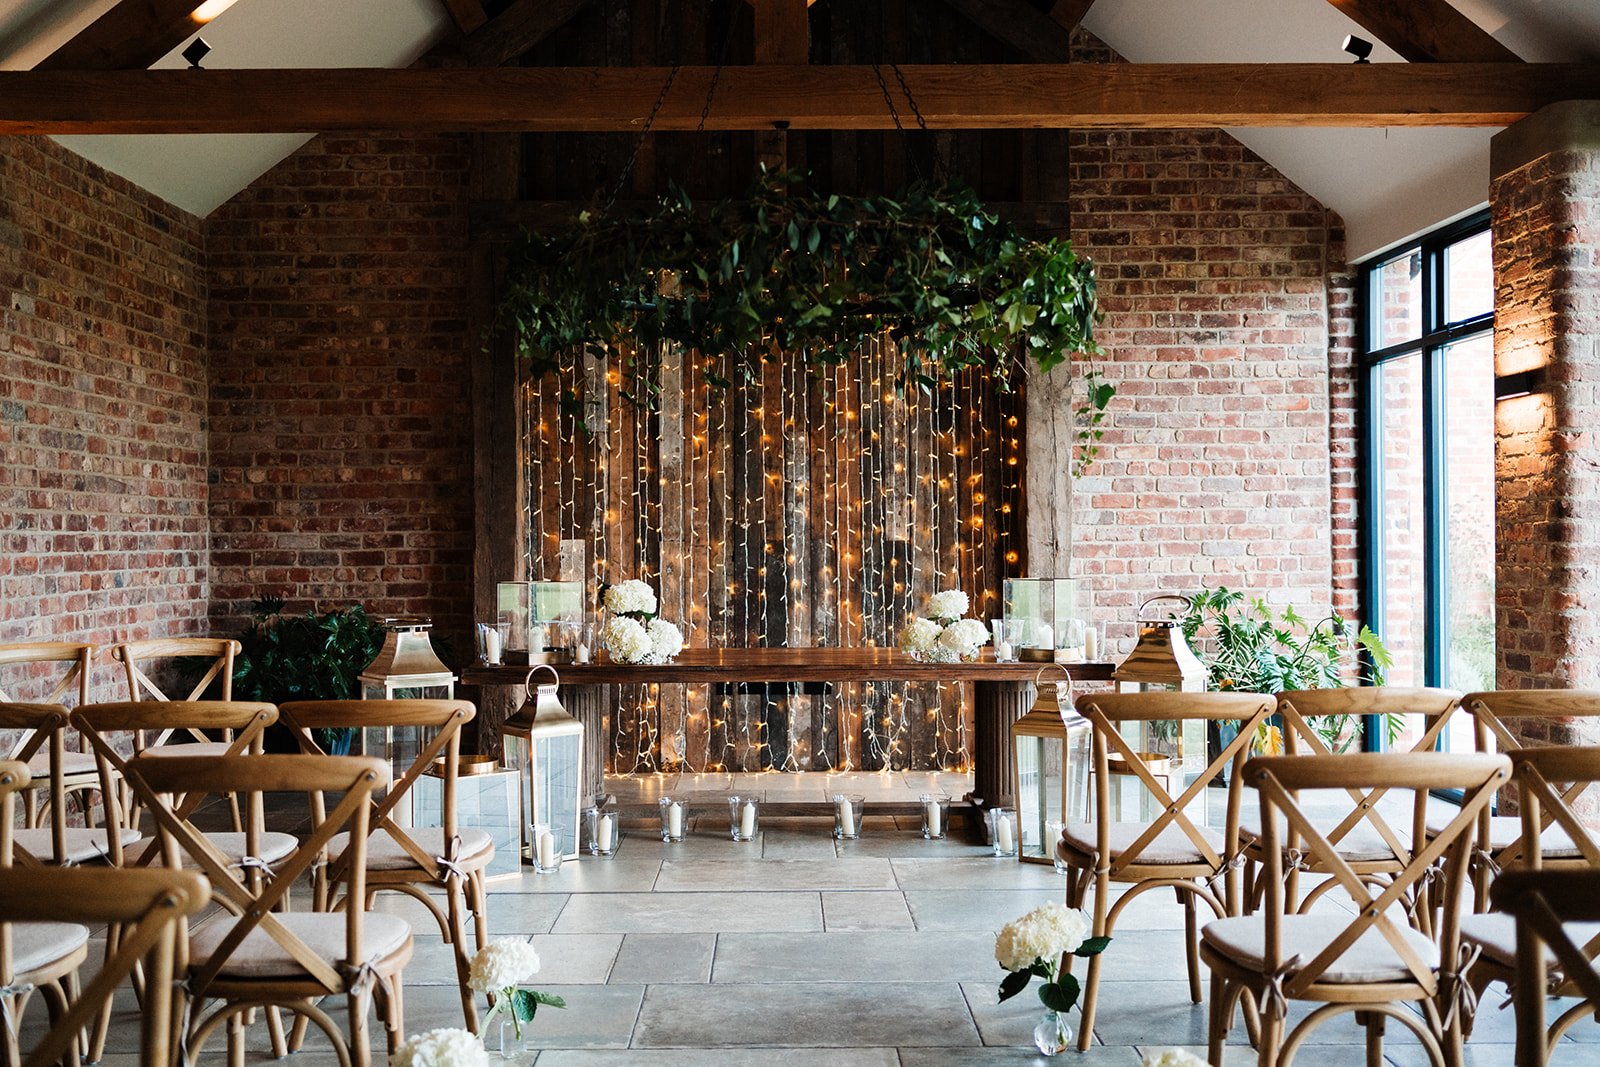 A barn room set up for a wedding ceremony at Thirsk Lodge Barns with wooden chairs and white details